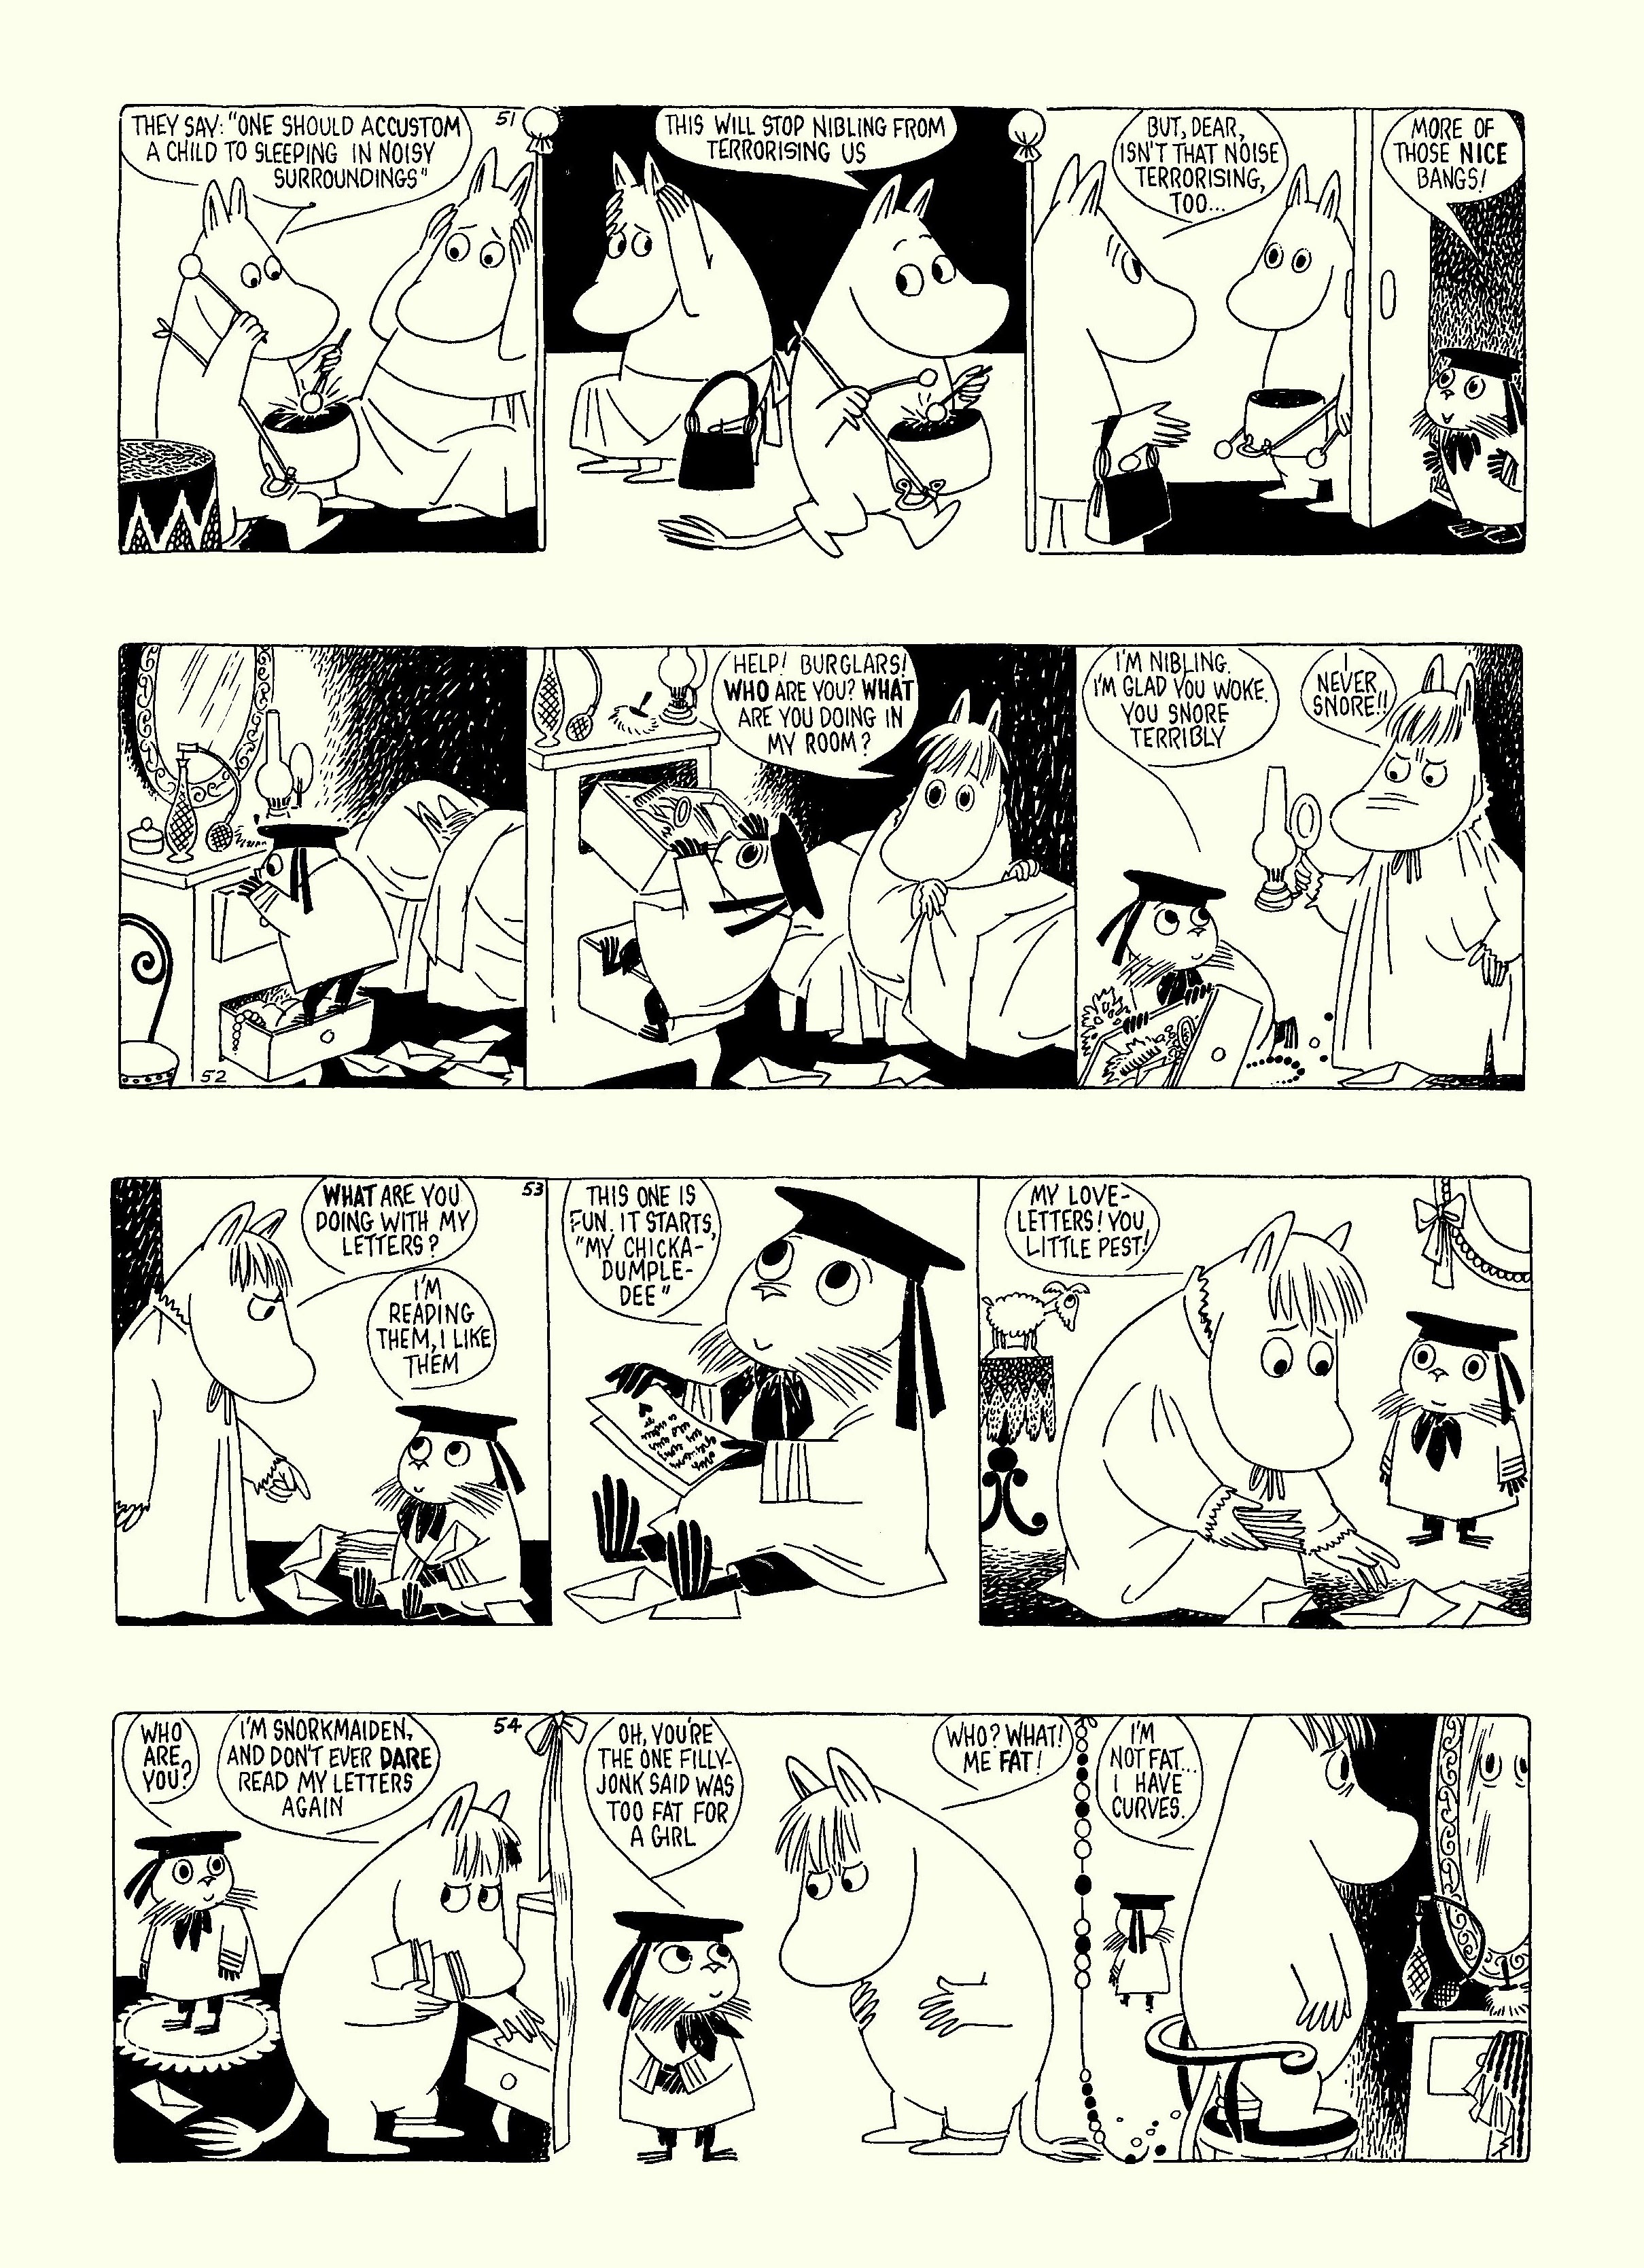 Read online Moomin: The Complete Tove Jansson Comic Strip comic -  Issue # TPB 5 - 19